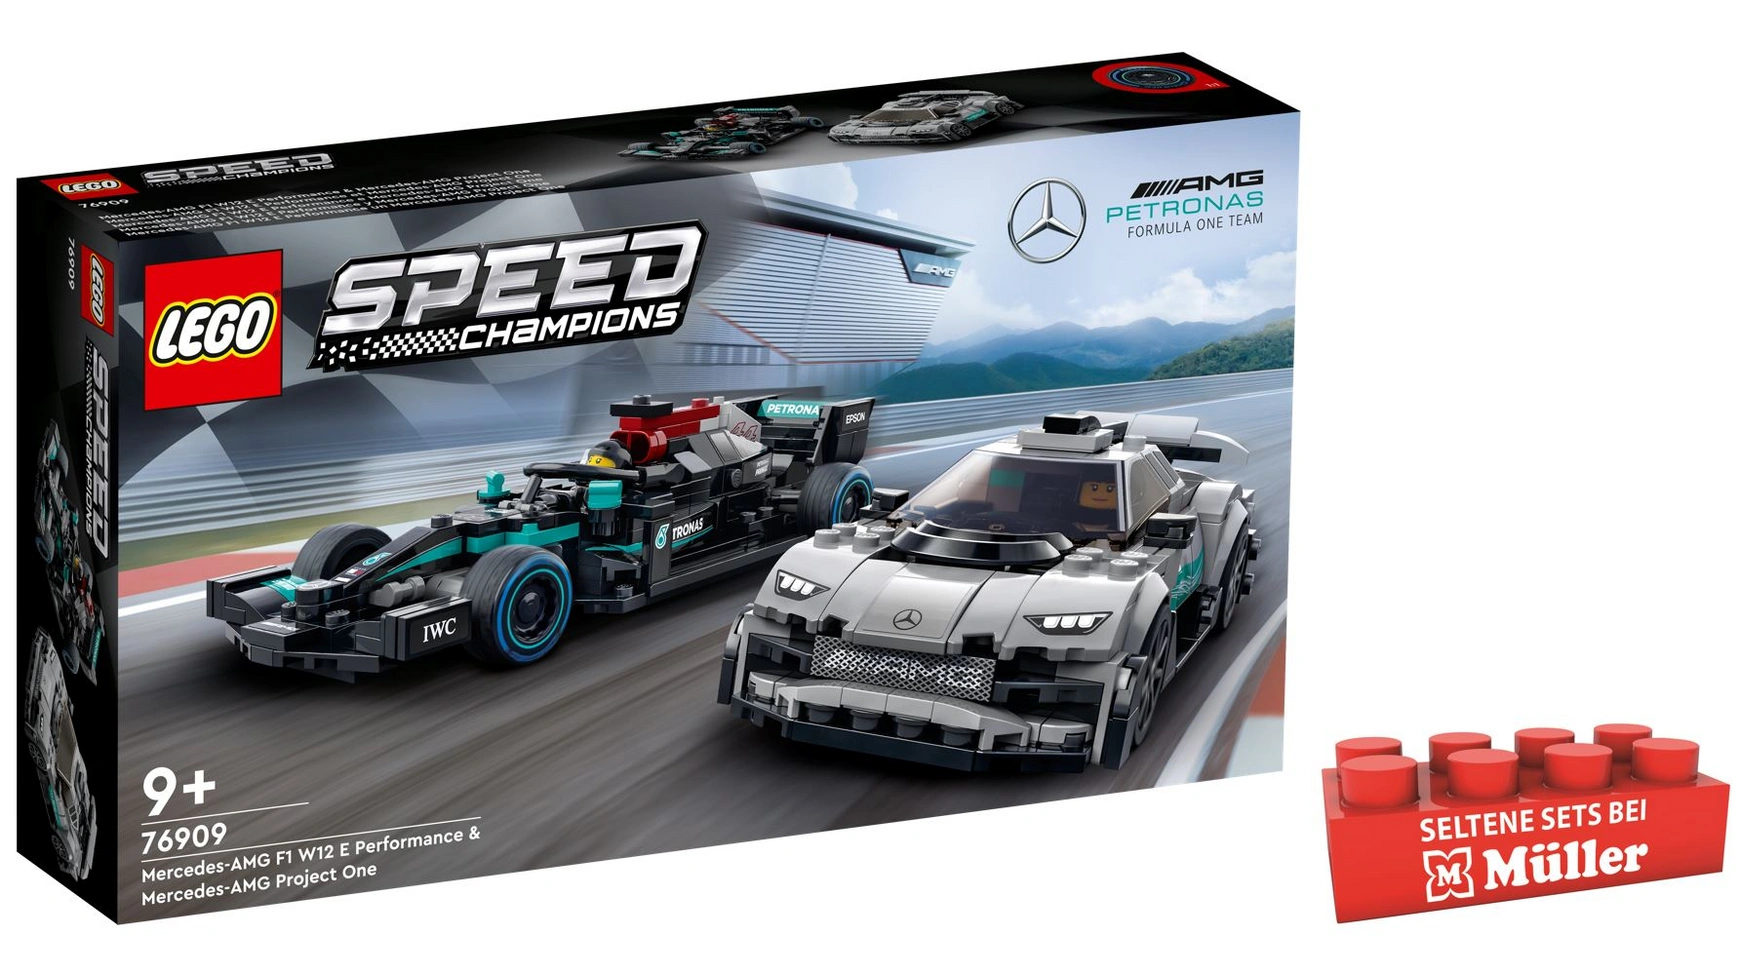 Lego Speed ​​​​Champions Mercedes-AMG F1 W12 E Performance и Mercedes-AMG Project One электромобили r toys mercedes bens amg 12v r c